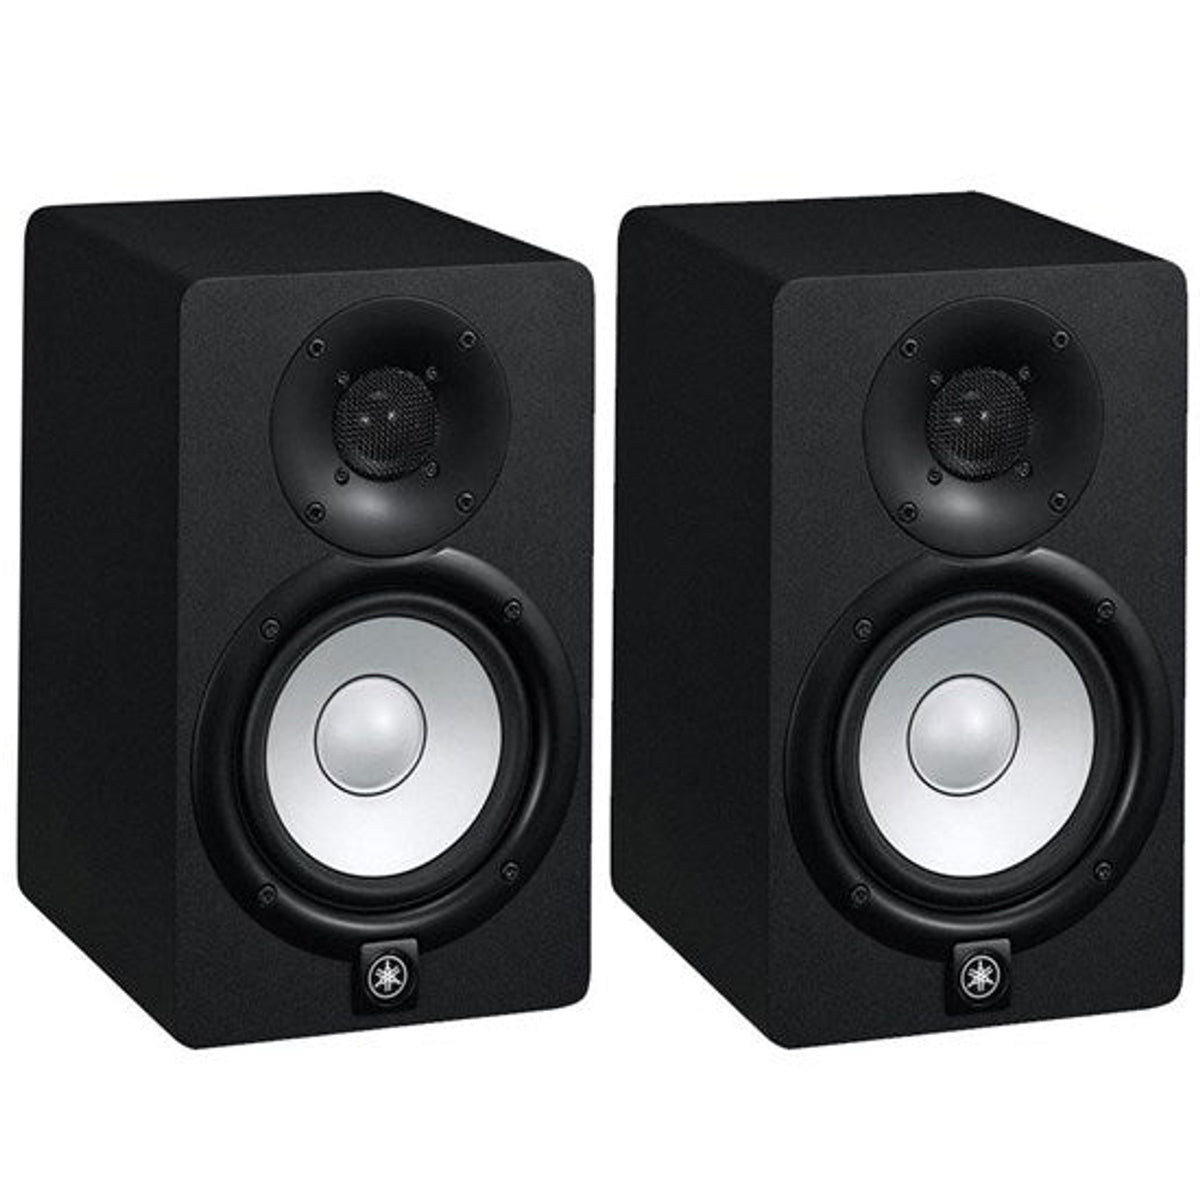 The Yamaha HS5 Active Nearfield Studio Monitors maintain the iconic white woofer and signature sound of Yamaha&#39;s nearfield reference monitors have been the industry standard since their introduction in the 1970s for one reason: accuracy.